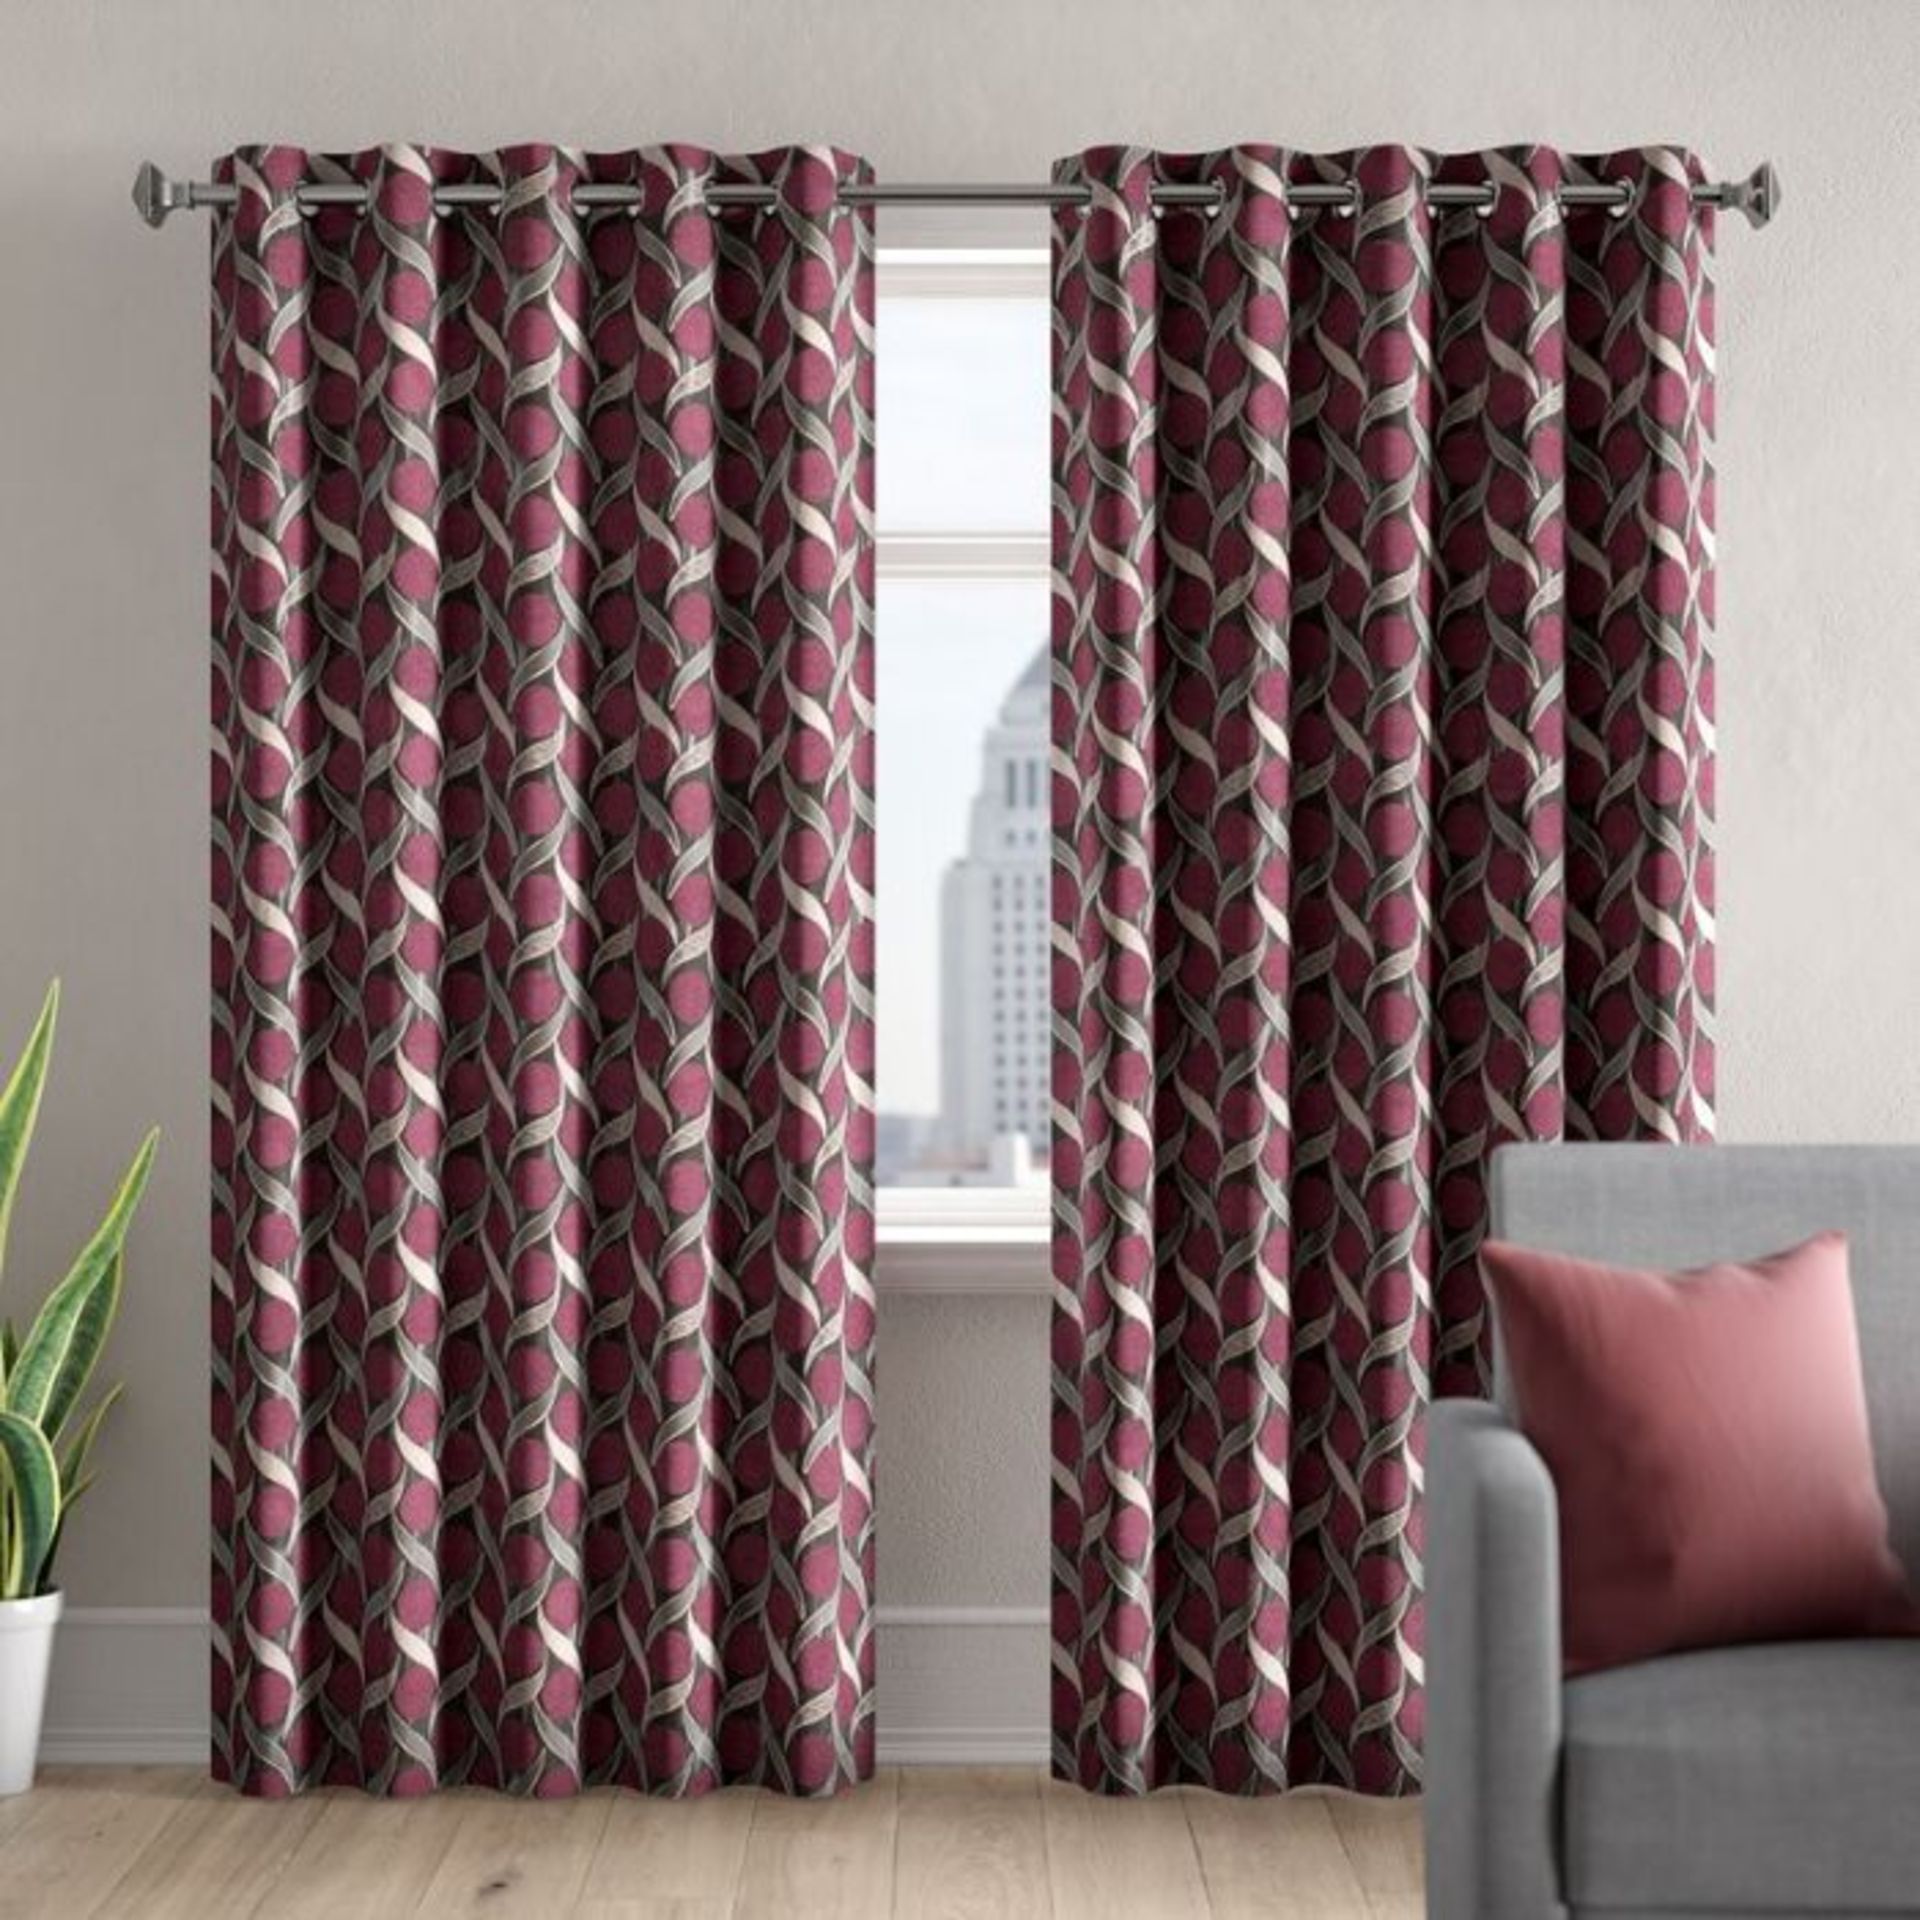 17 Stories, Eyelet Room Darkening Thermal Curtains Spice (168cm W x 183cm D) - RRP £47.99 (